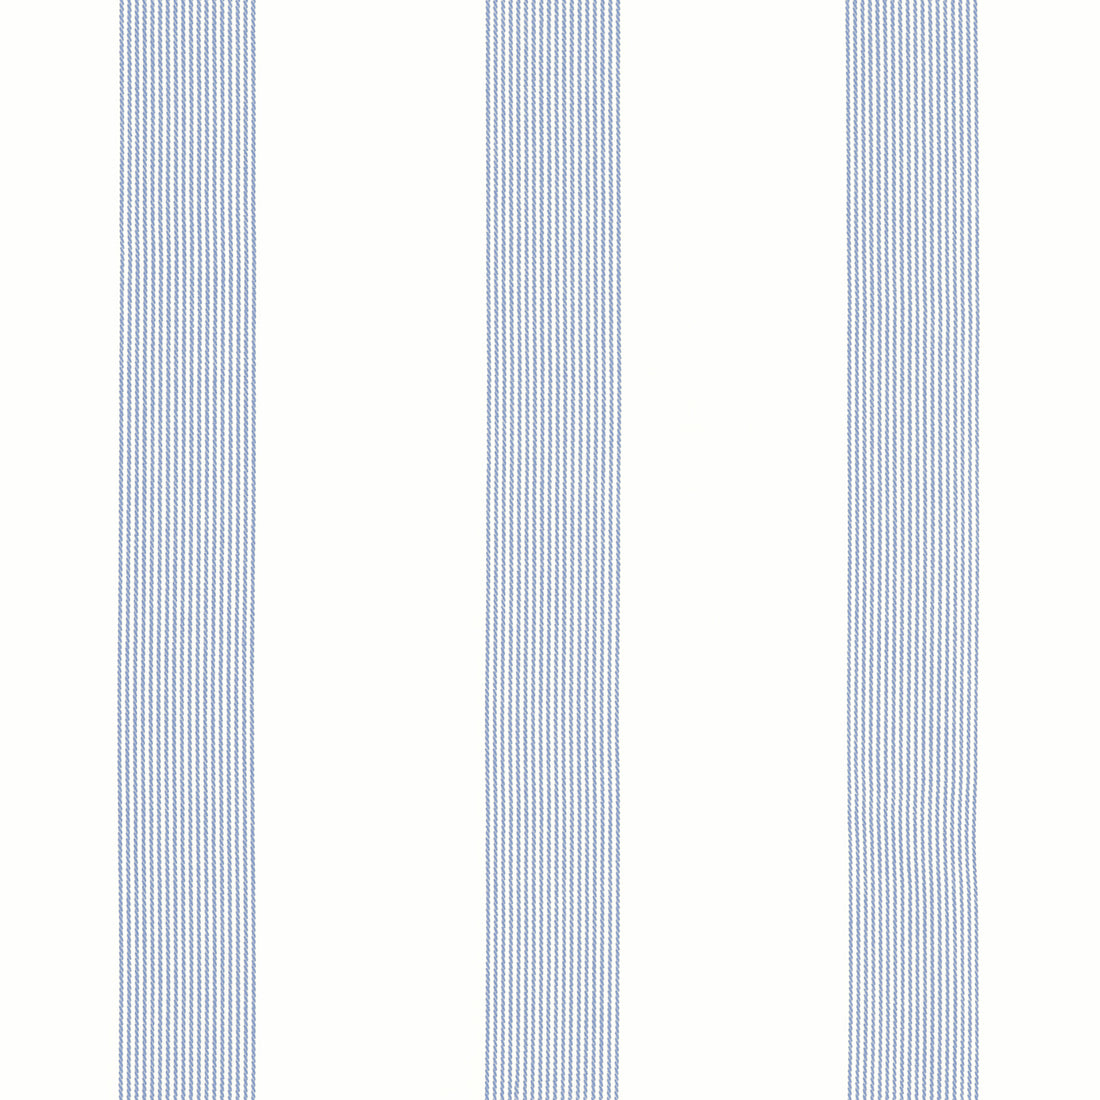 Sabine fabric in stripe oxford blue color - pattern number FWW81736 - by Thibaut in the Locale Wide Width collection